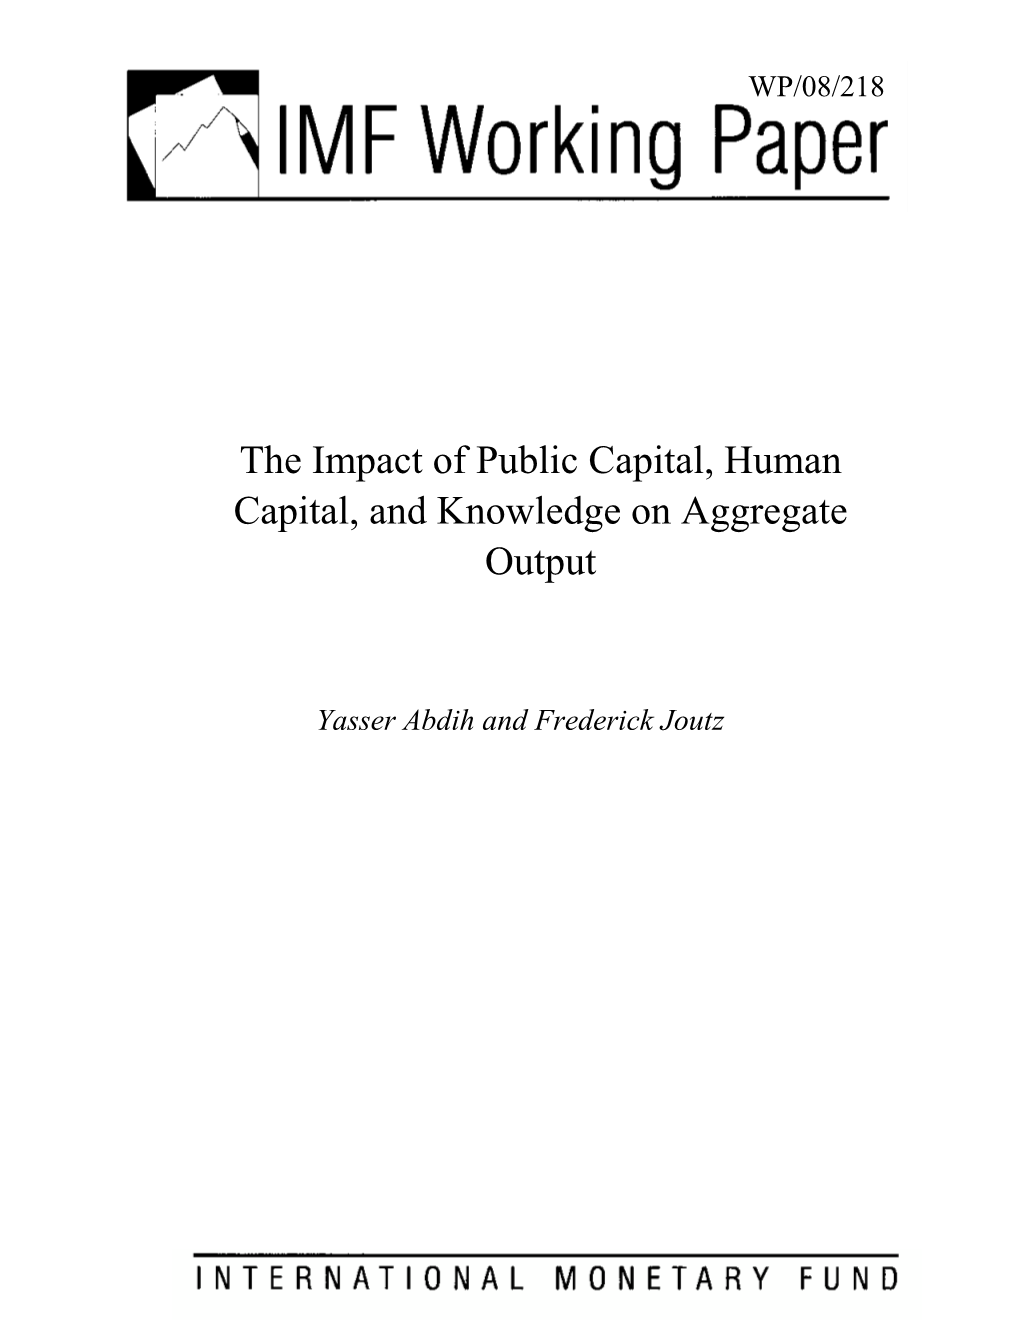 The Impact of Public Capital, Human Capital, and Knowledge on Aggregate Output